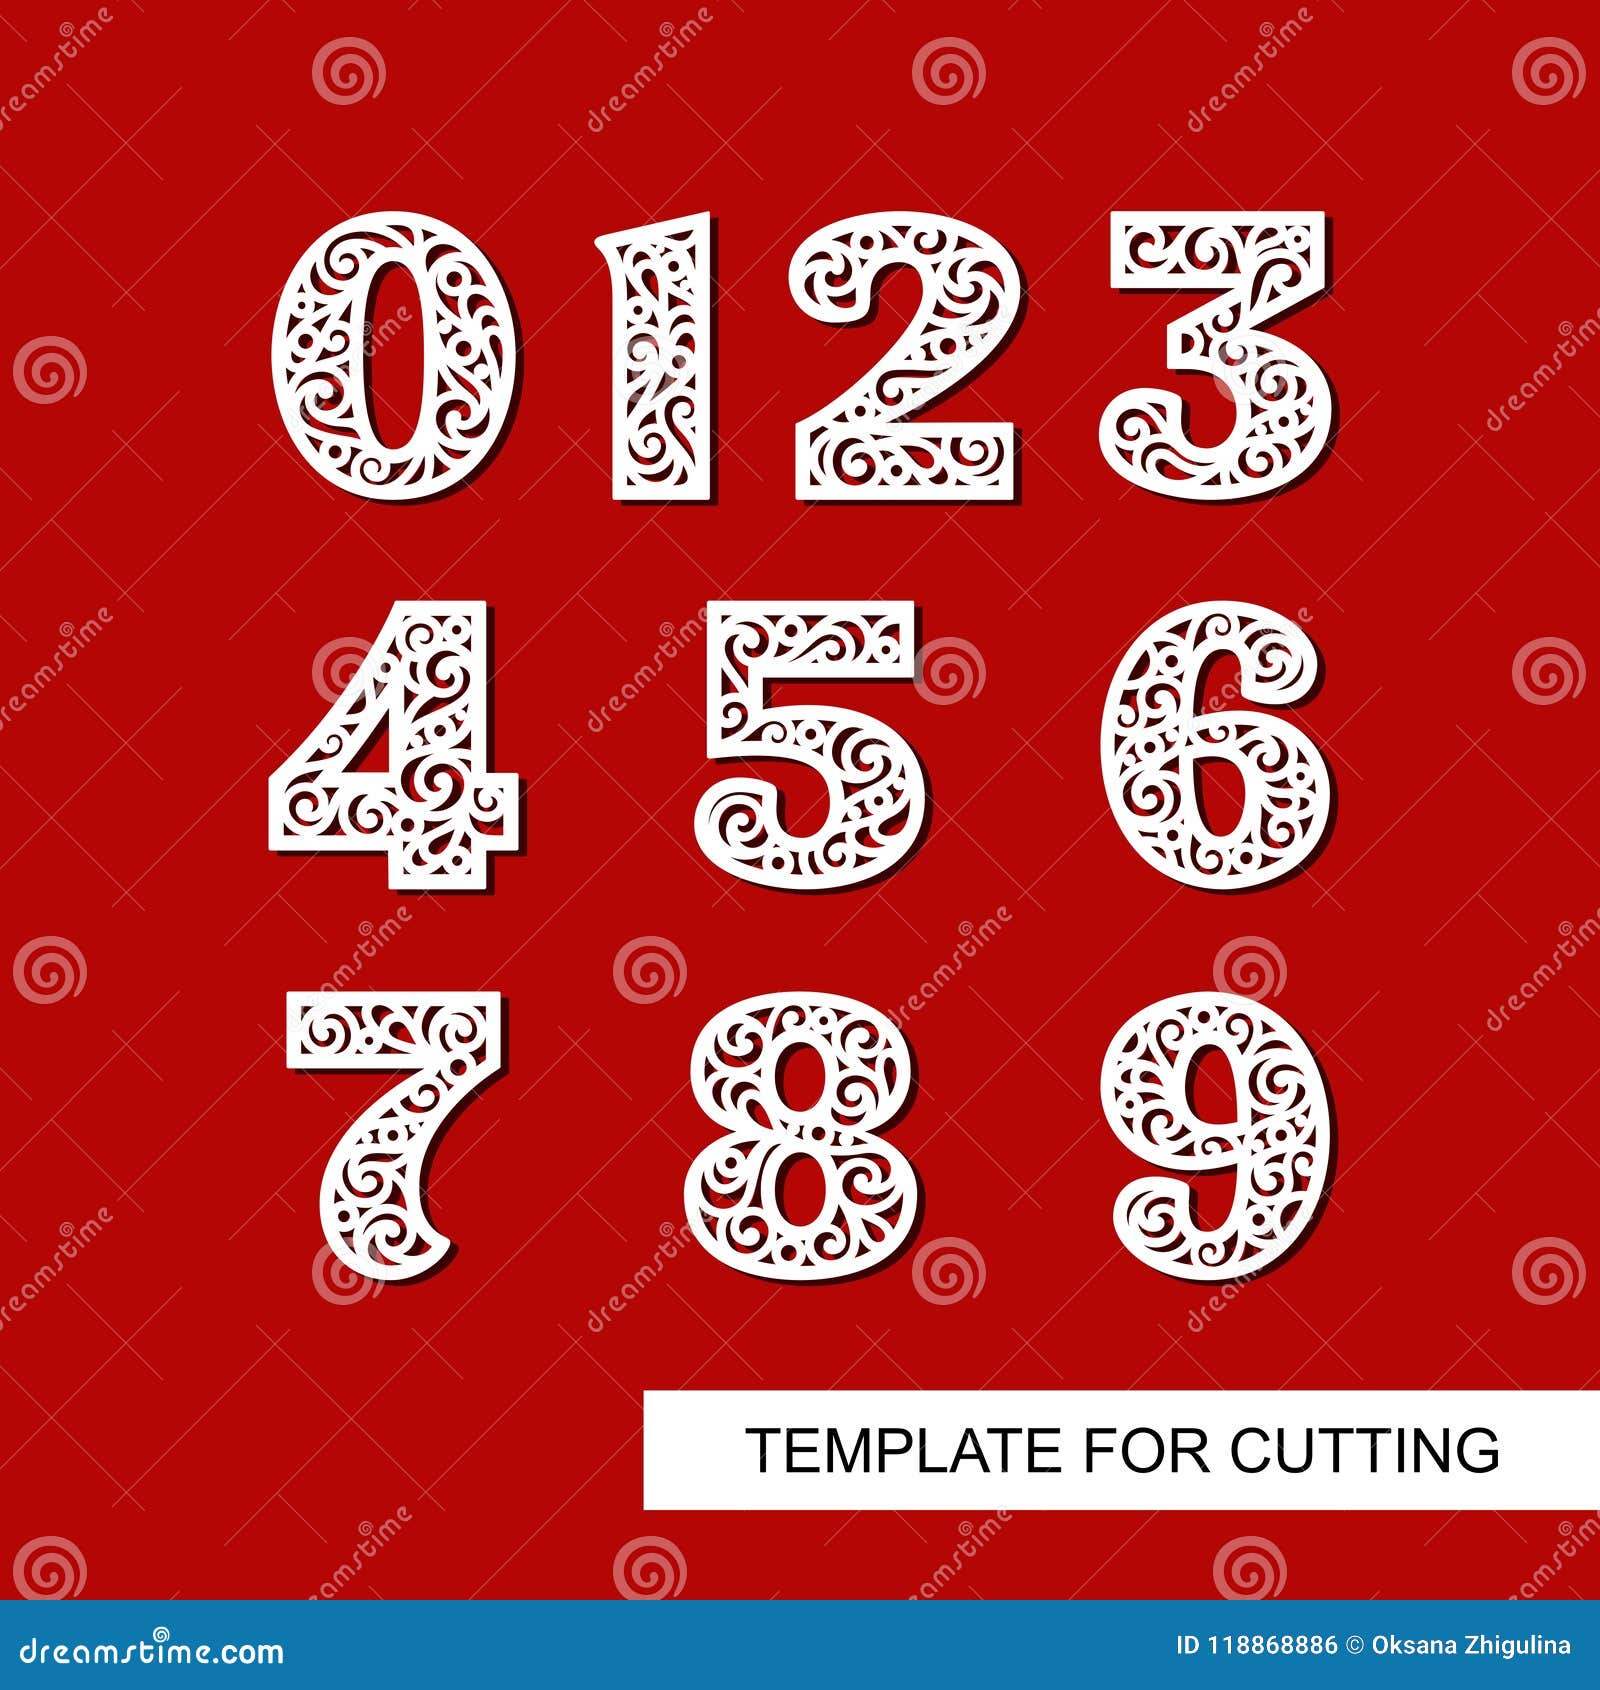 Numbers one two three 1 2 3 Stock Illustration